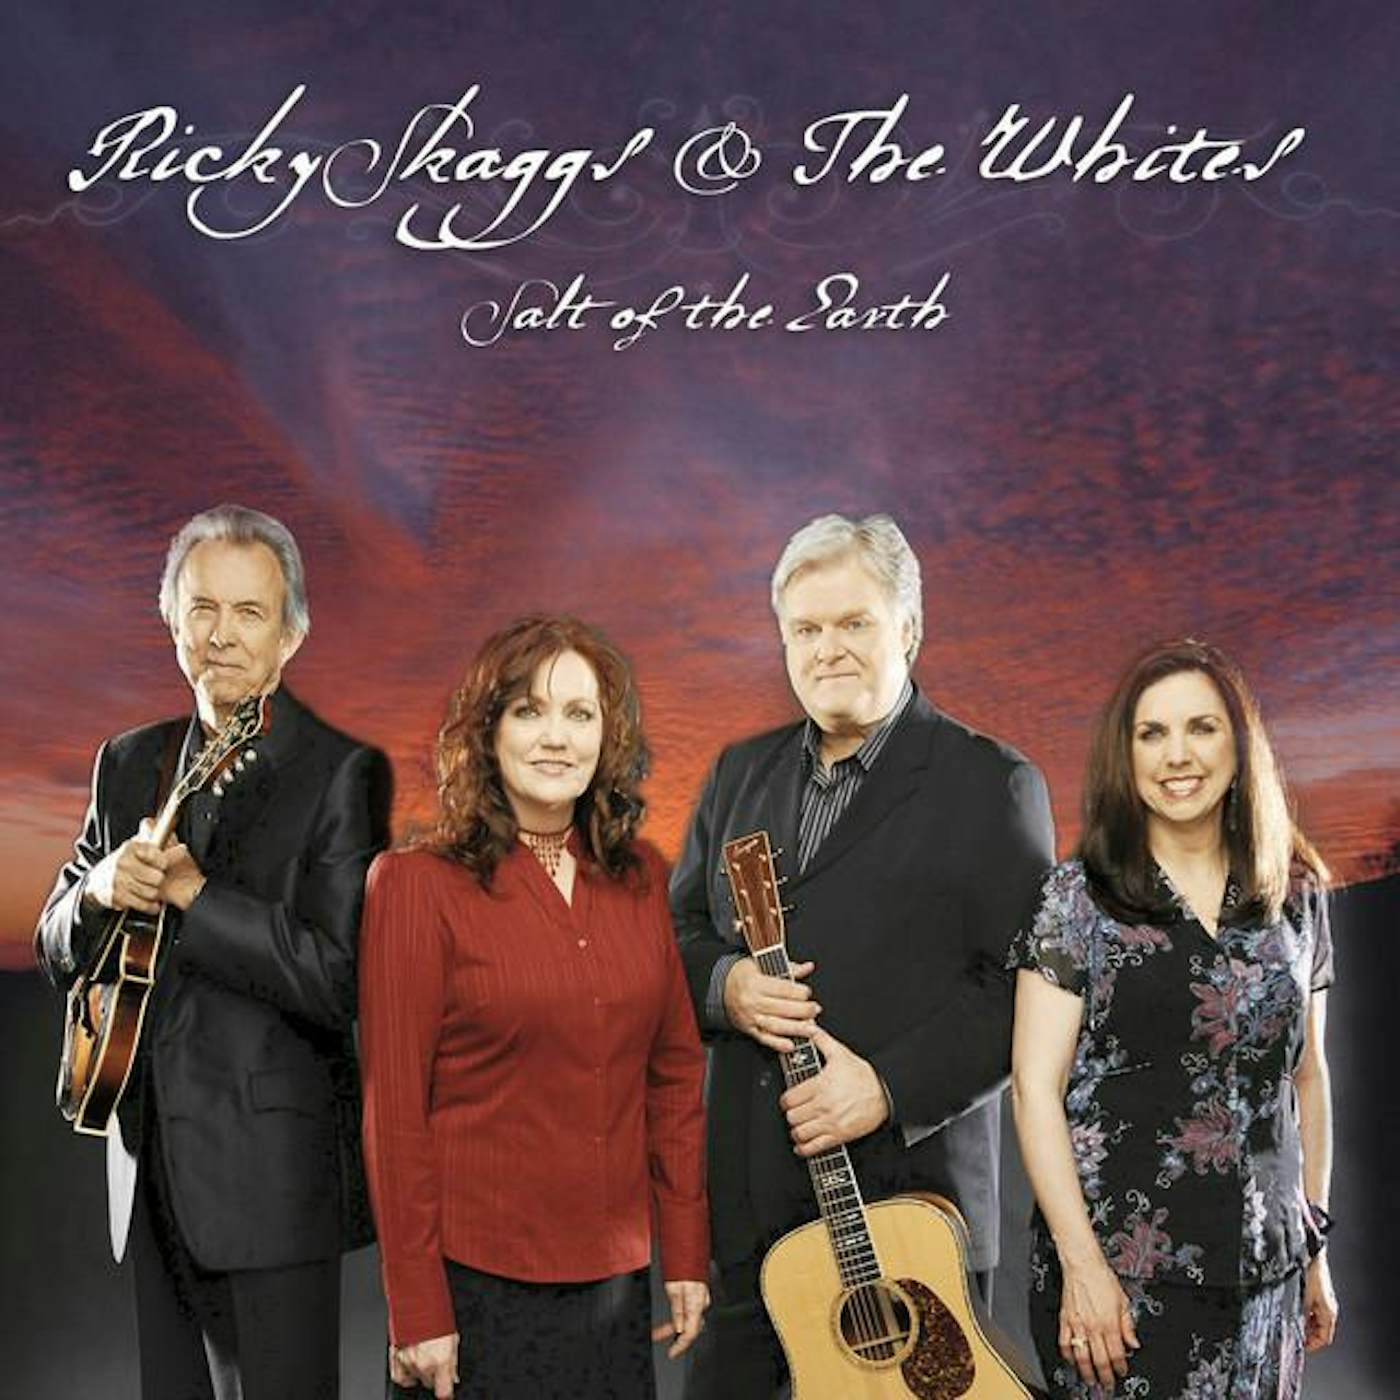 Ricky Skaggs and The Whites